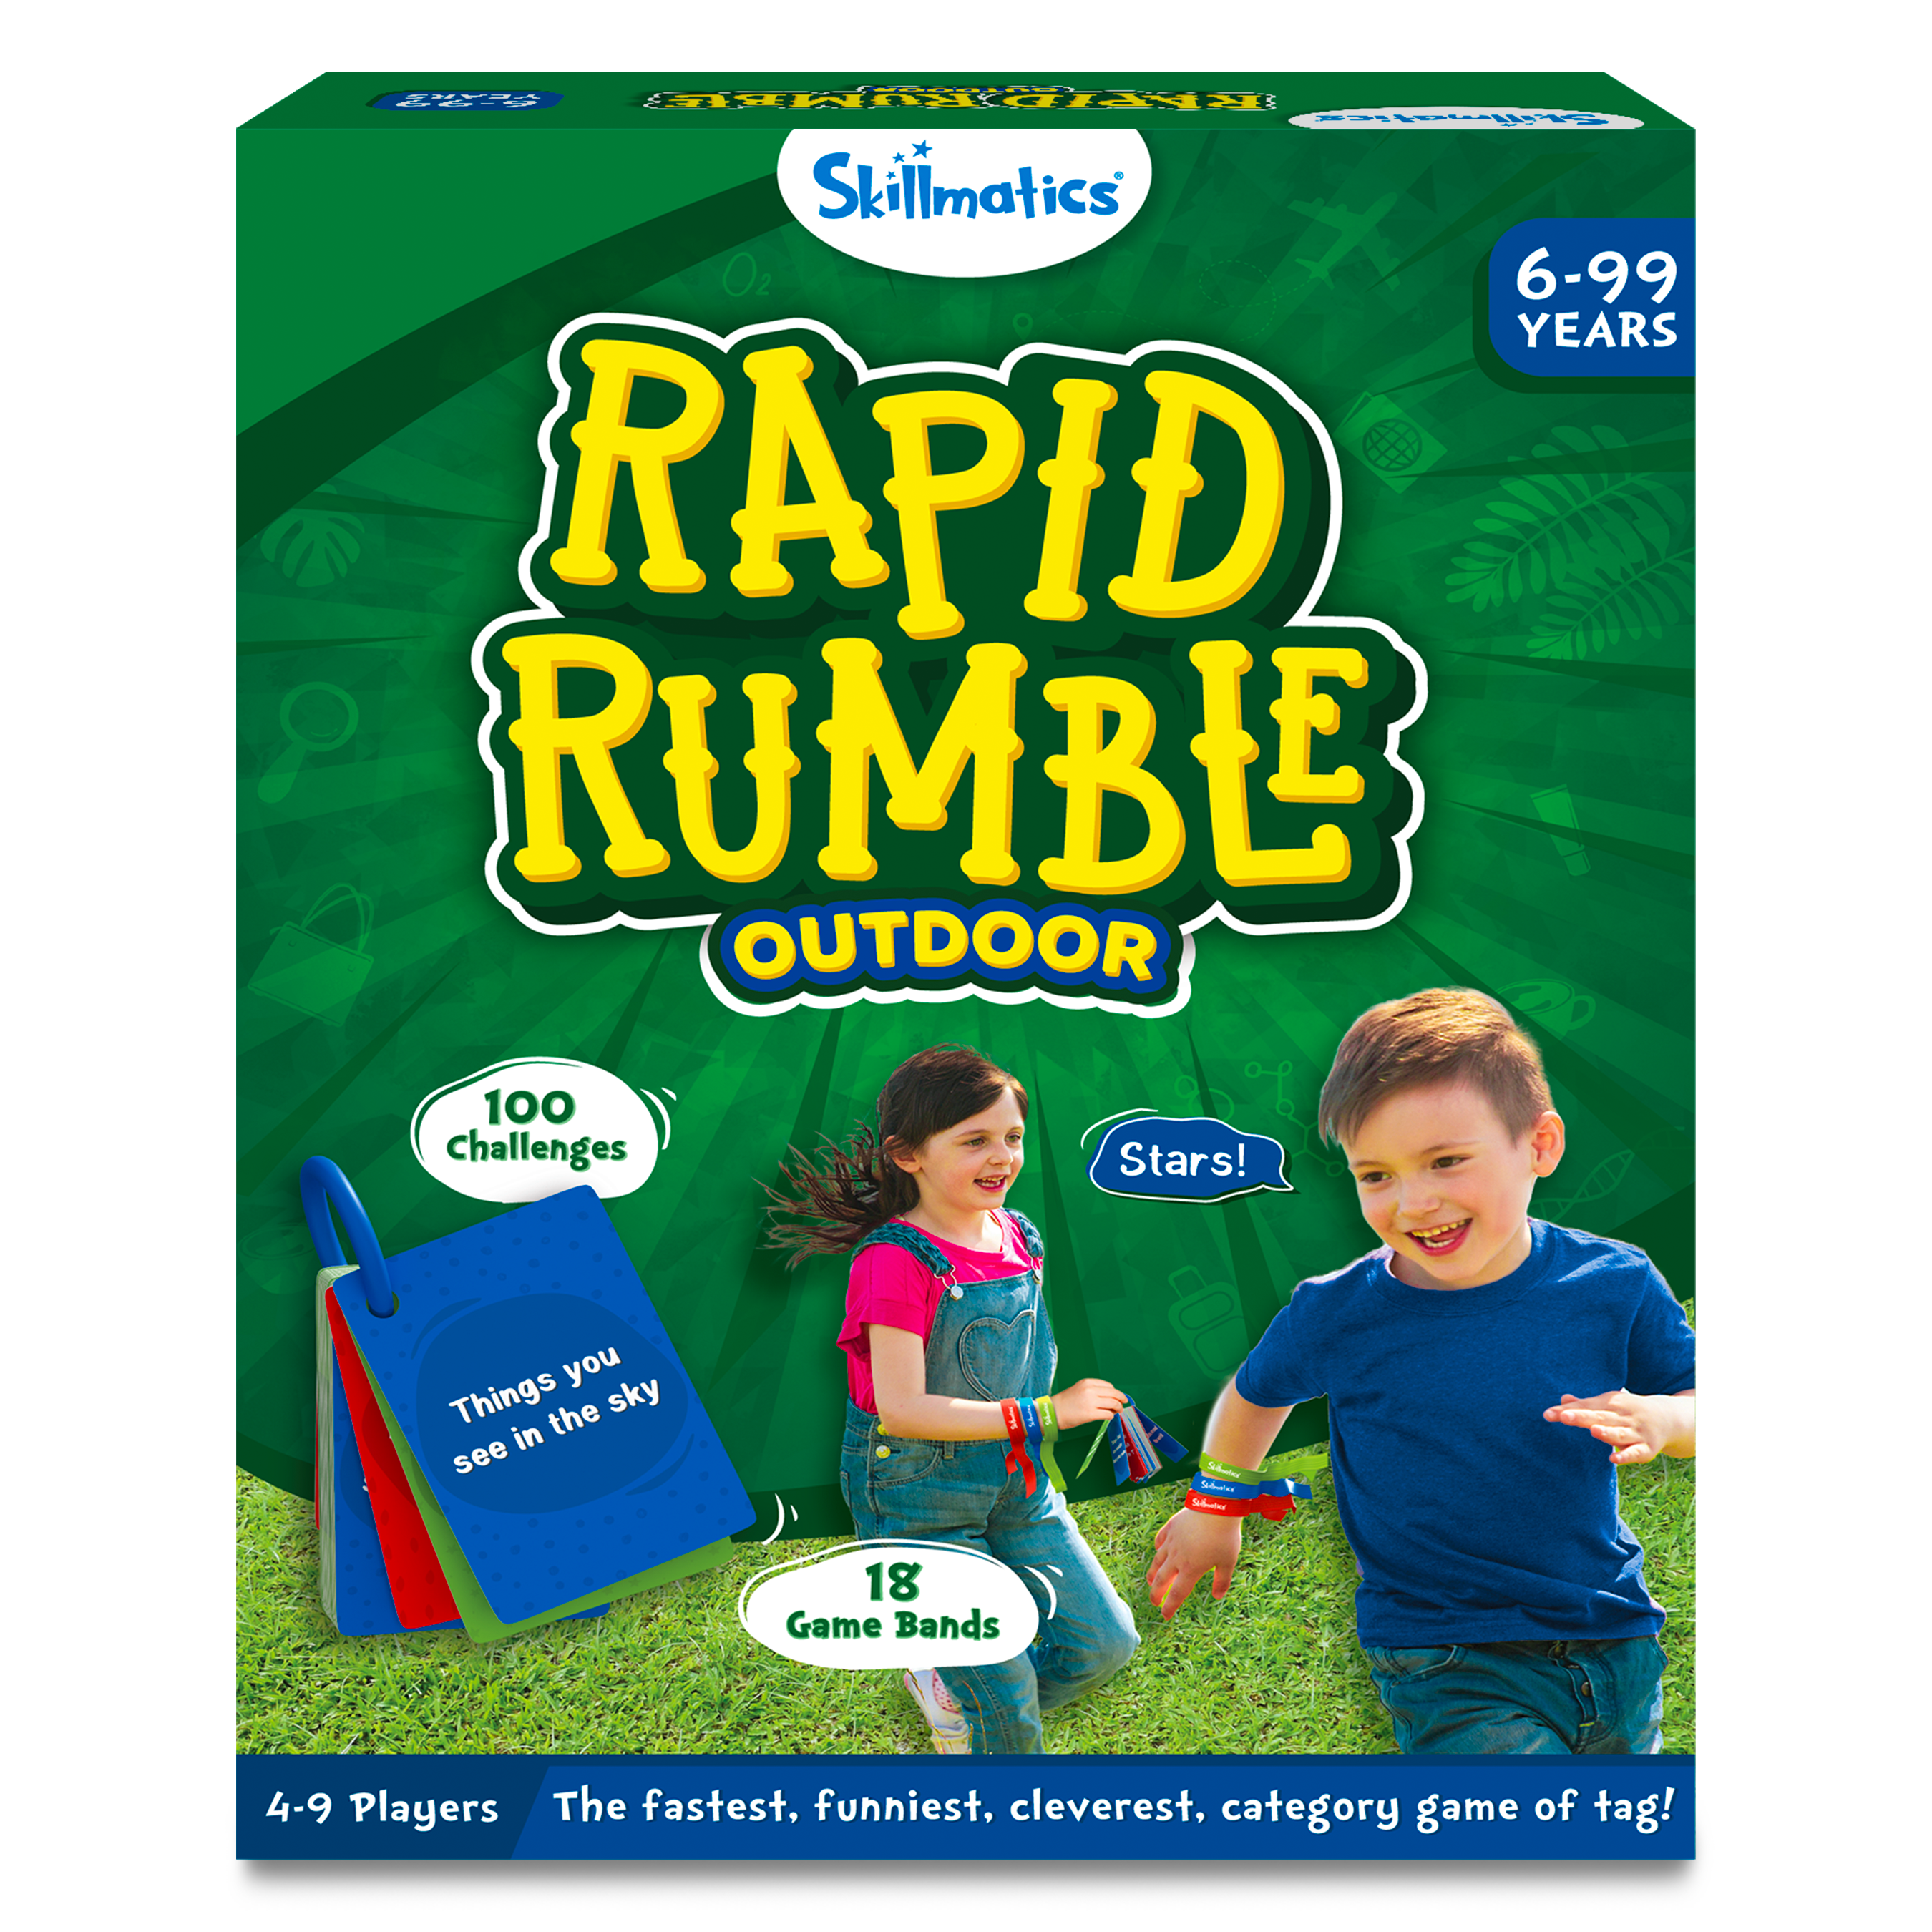 Skillmatics Rapid Rumble Outdoor Edition, Educational & Clever Category Game Of Catch, Games For Kids, Teens & Adults